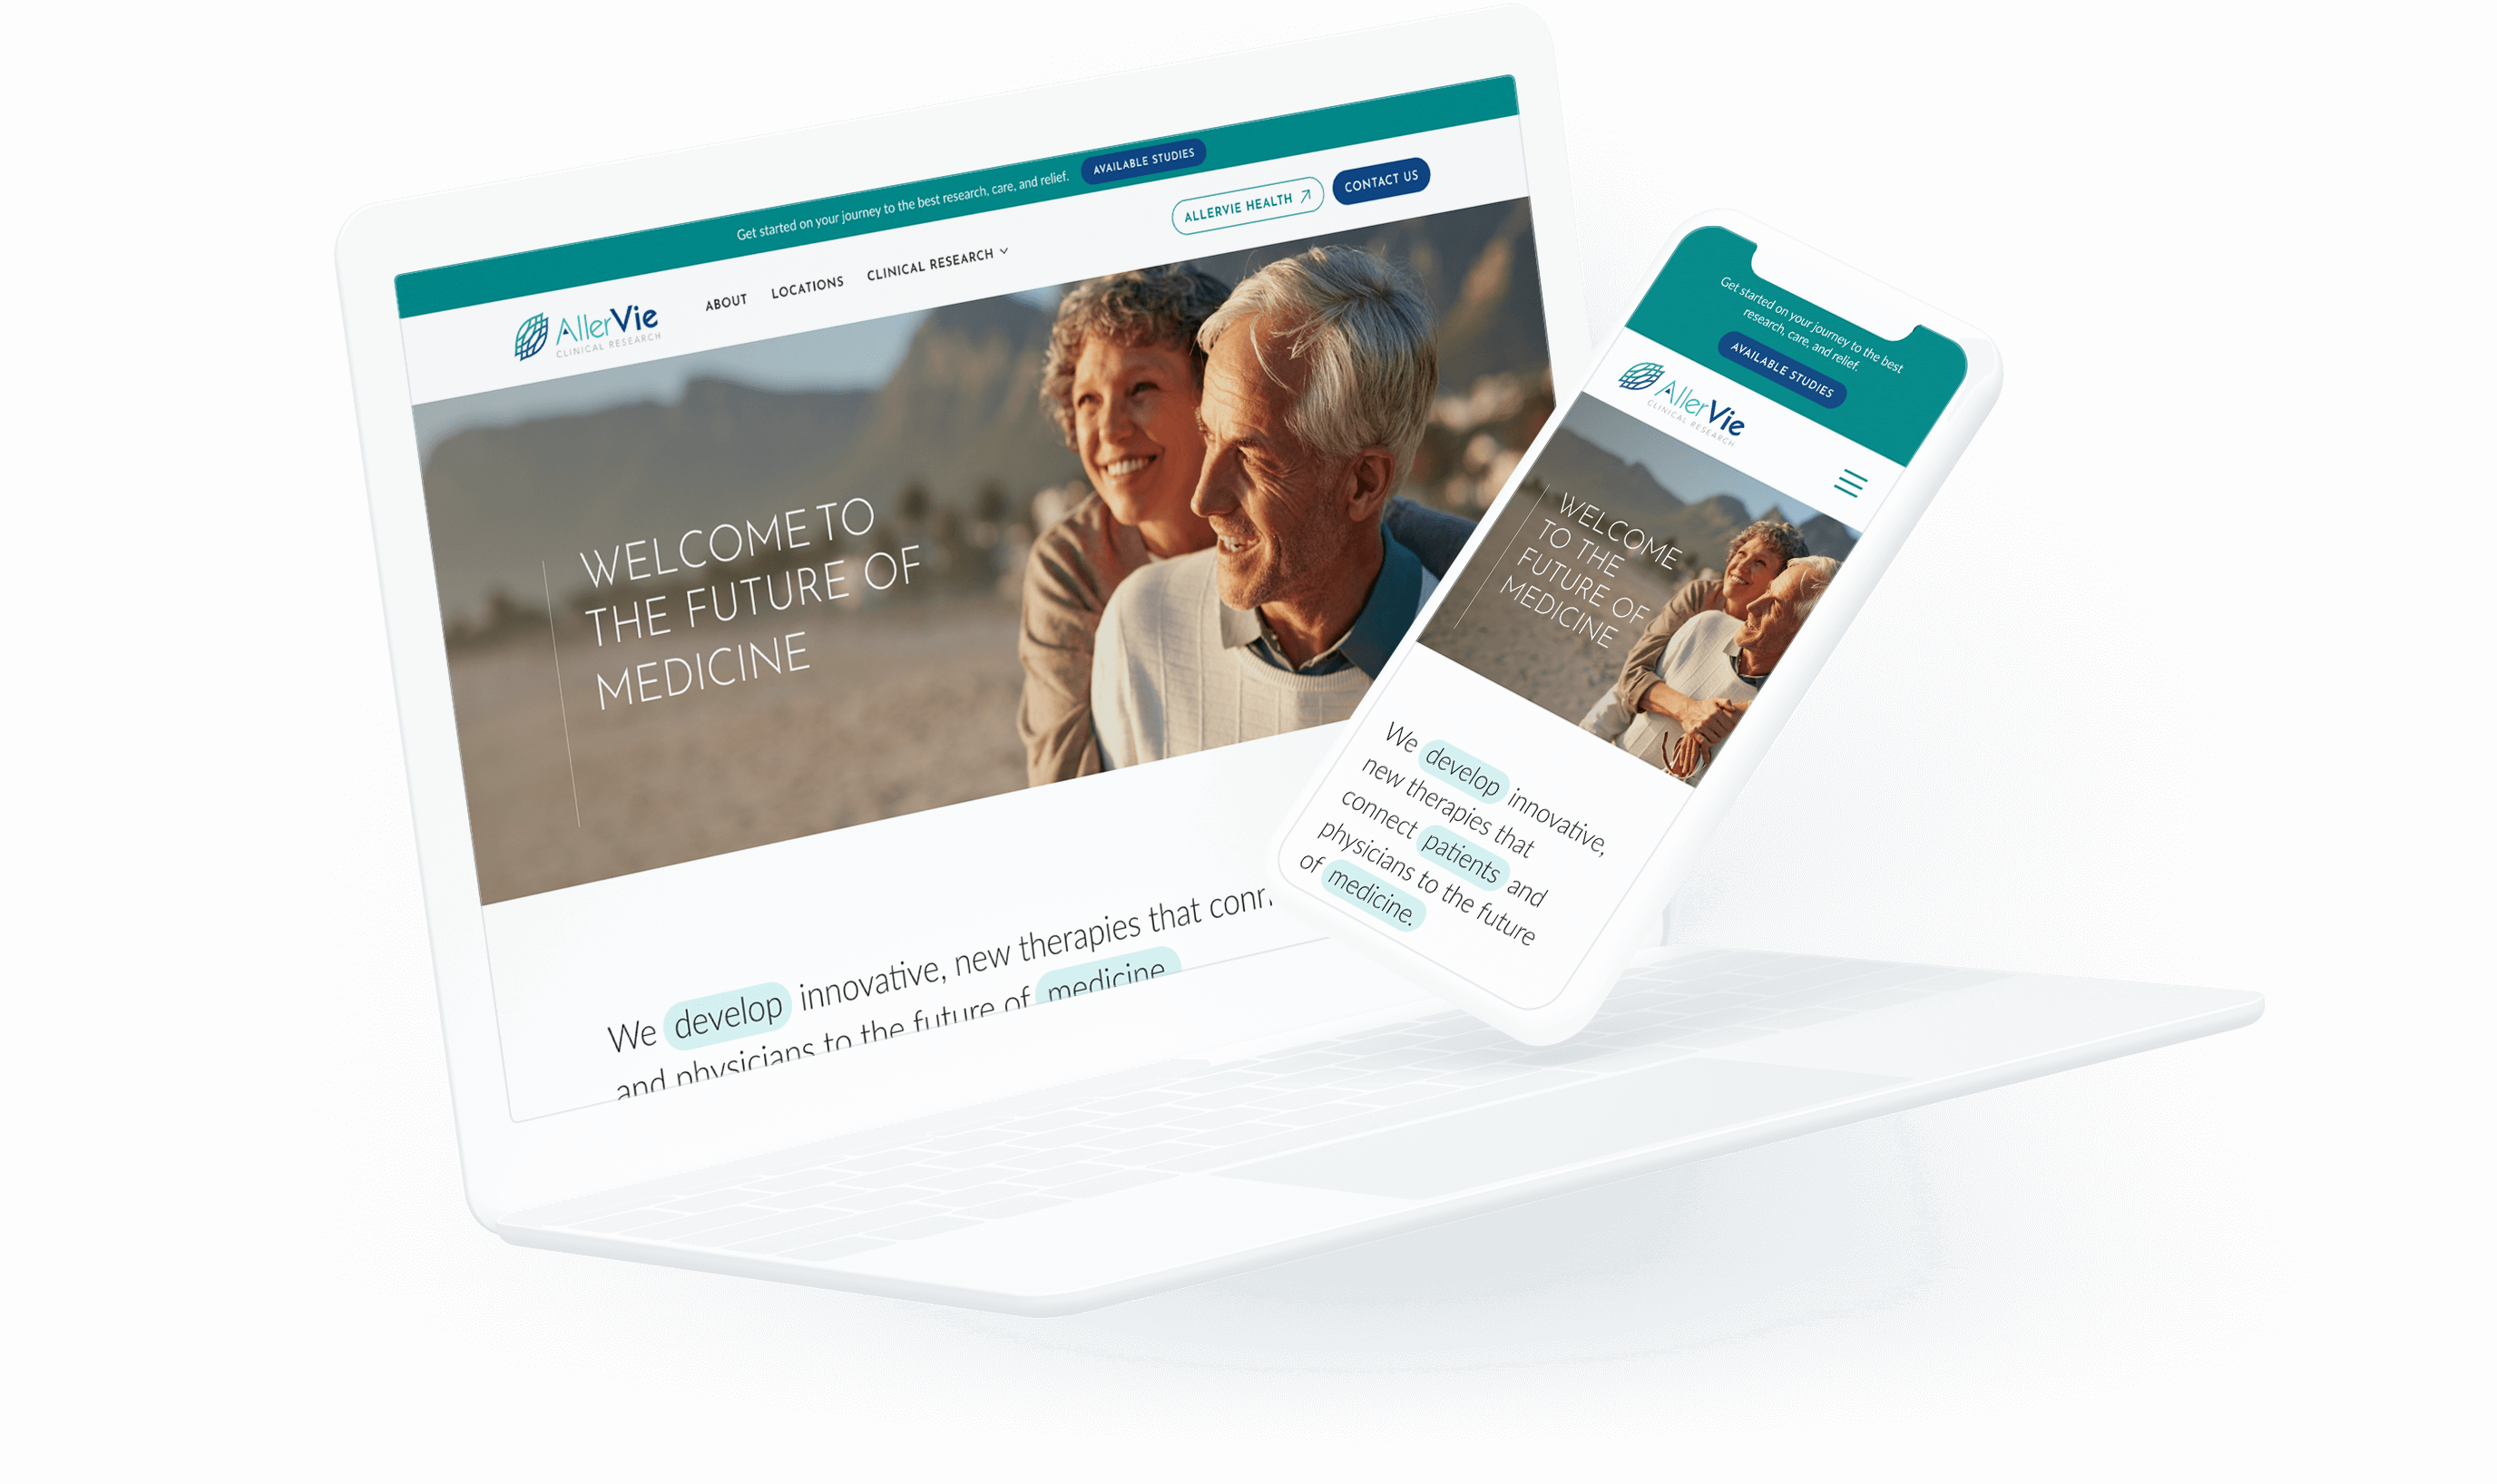 AllerVie Clinical Research Mockup